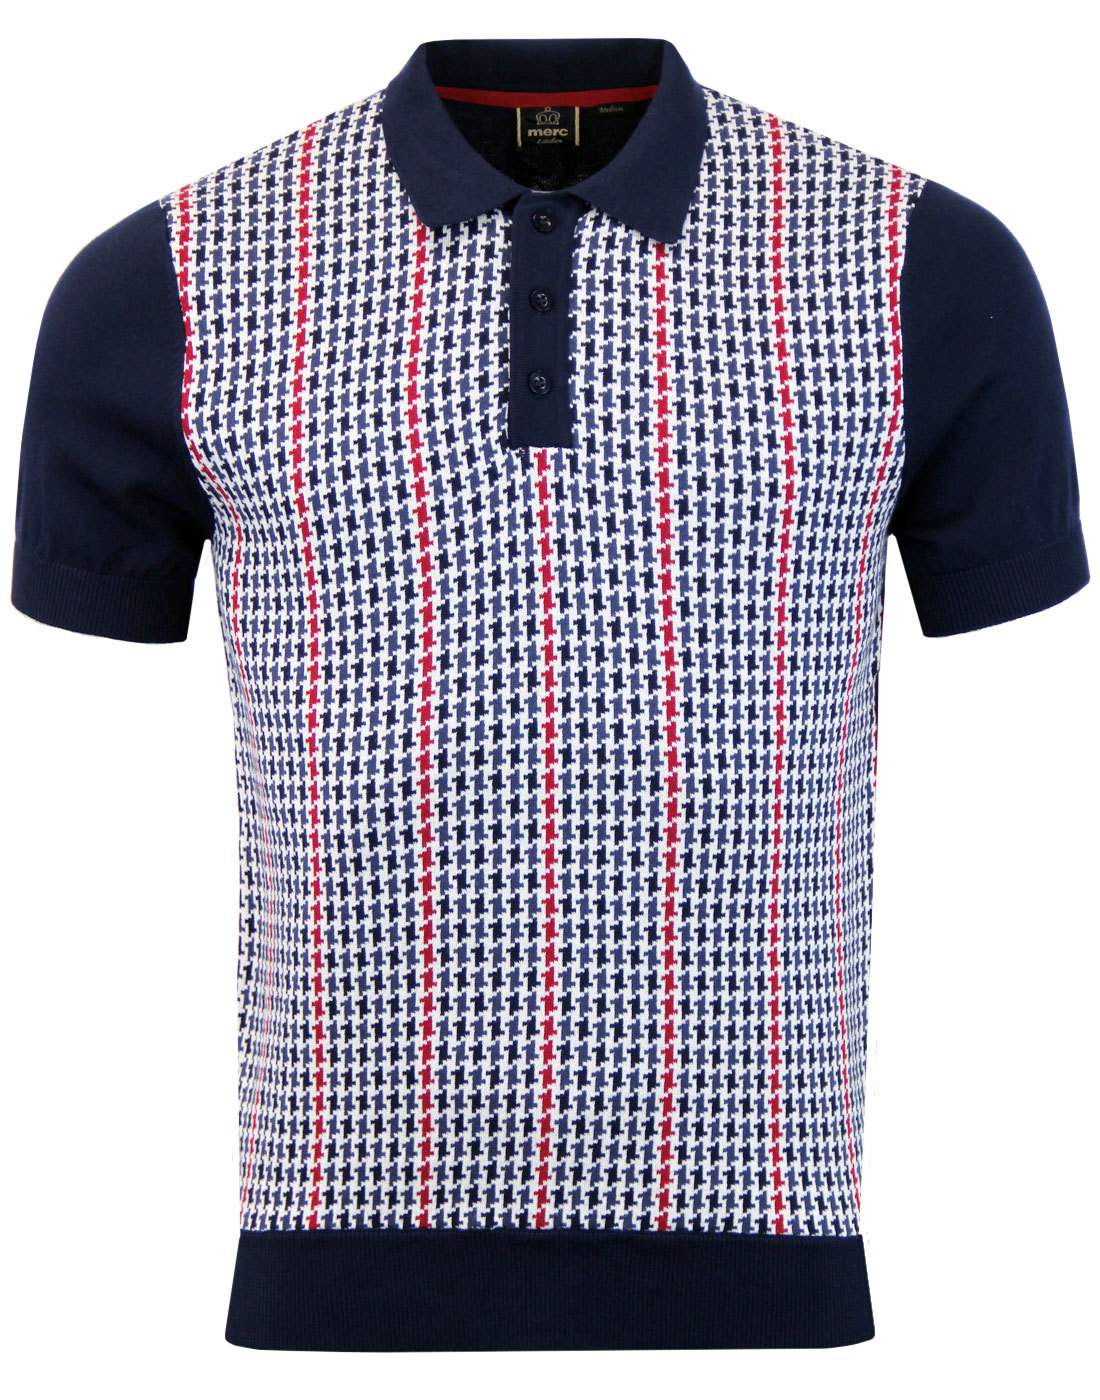 MERC Picton Retro 1960s Mod Multi Dogtooth Knitted Polo in Navy